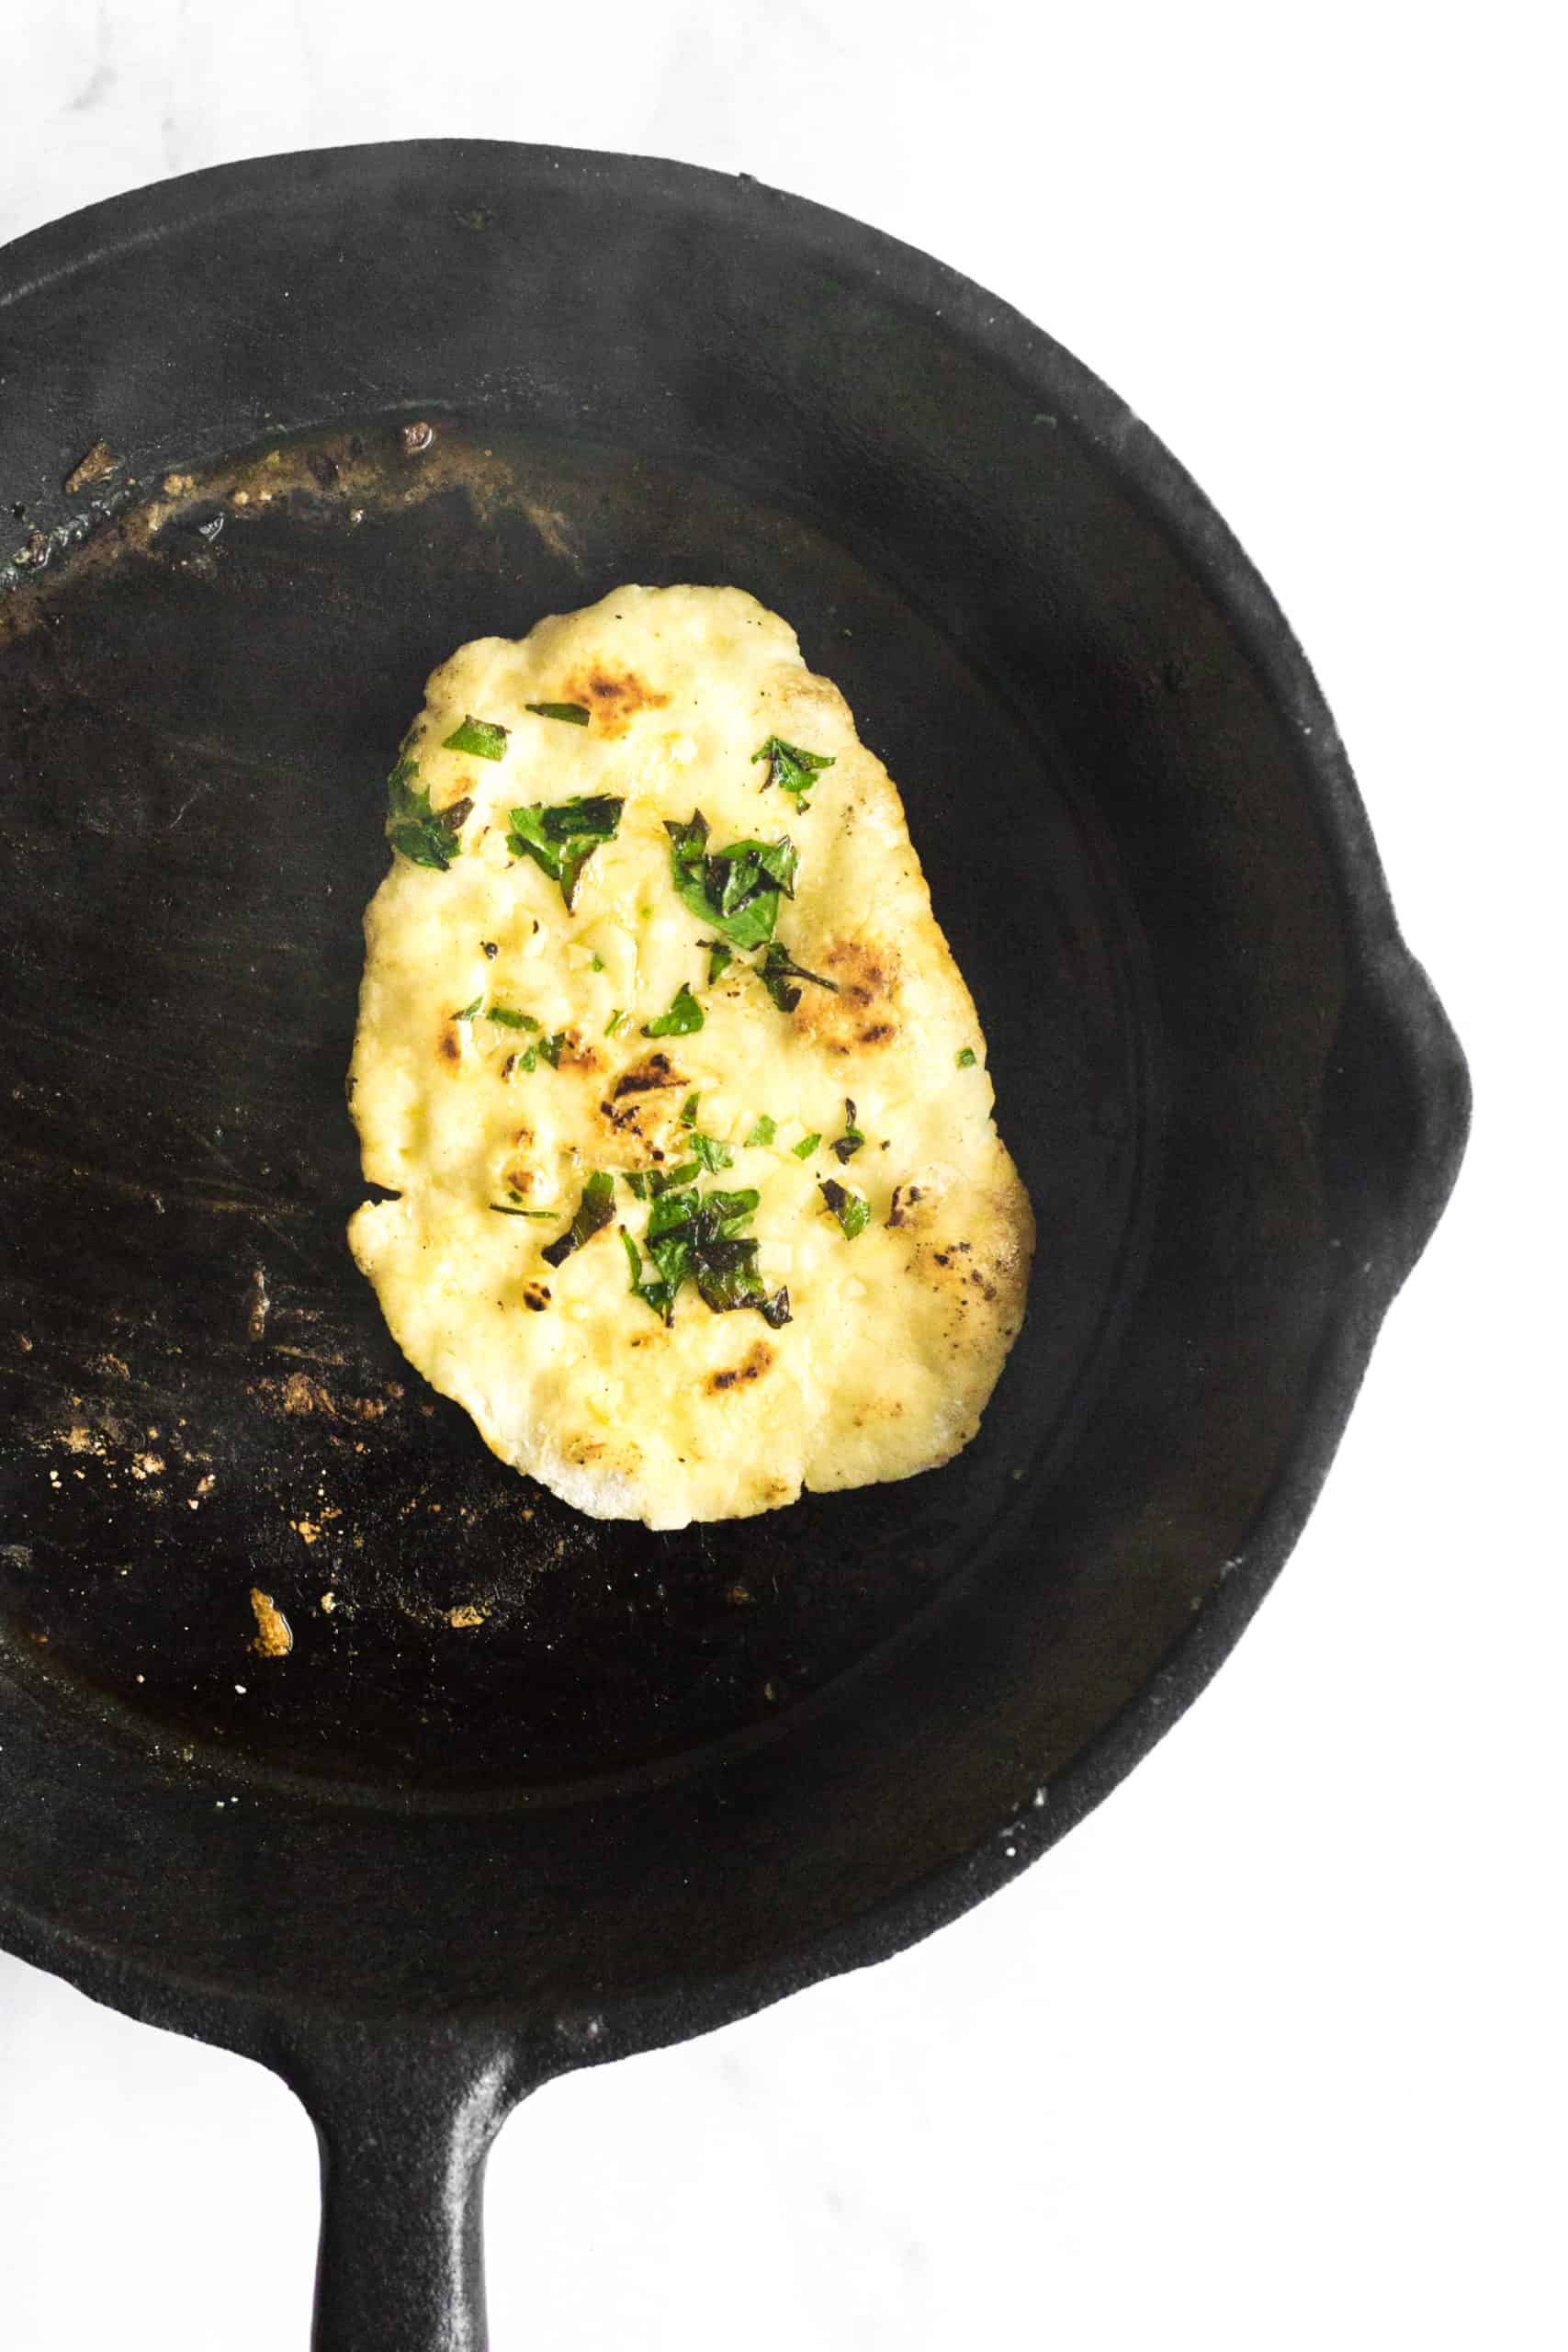 Gluten-free naan bread cooking in a cast iron skillet.